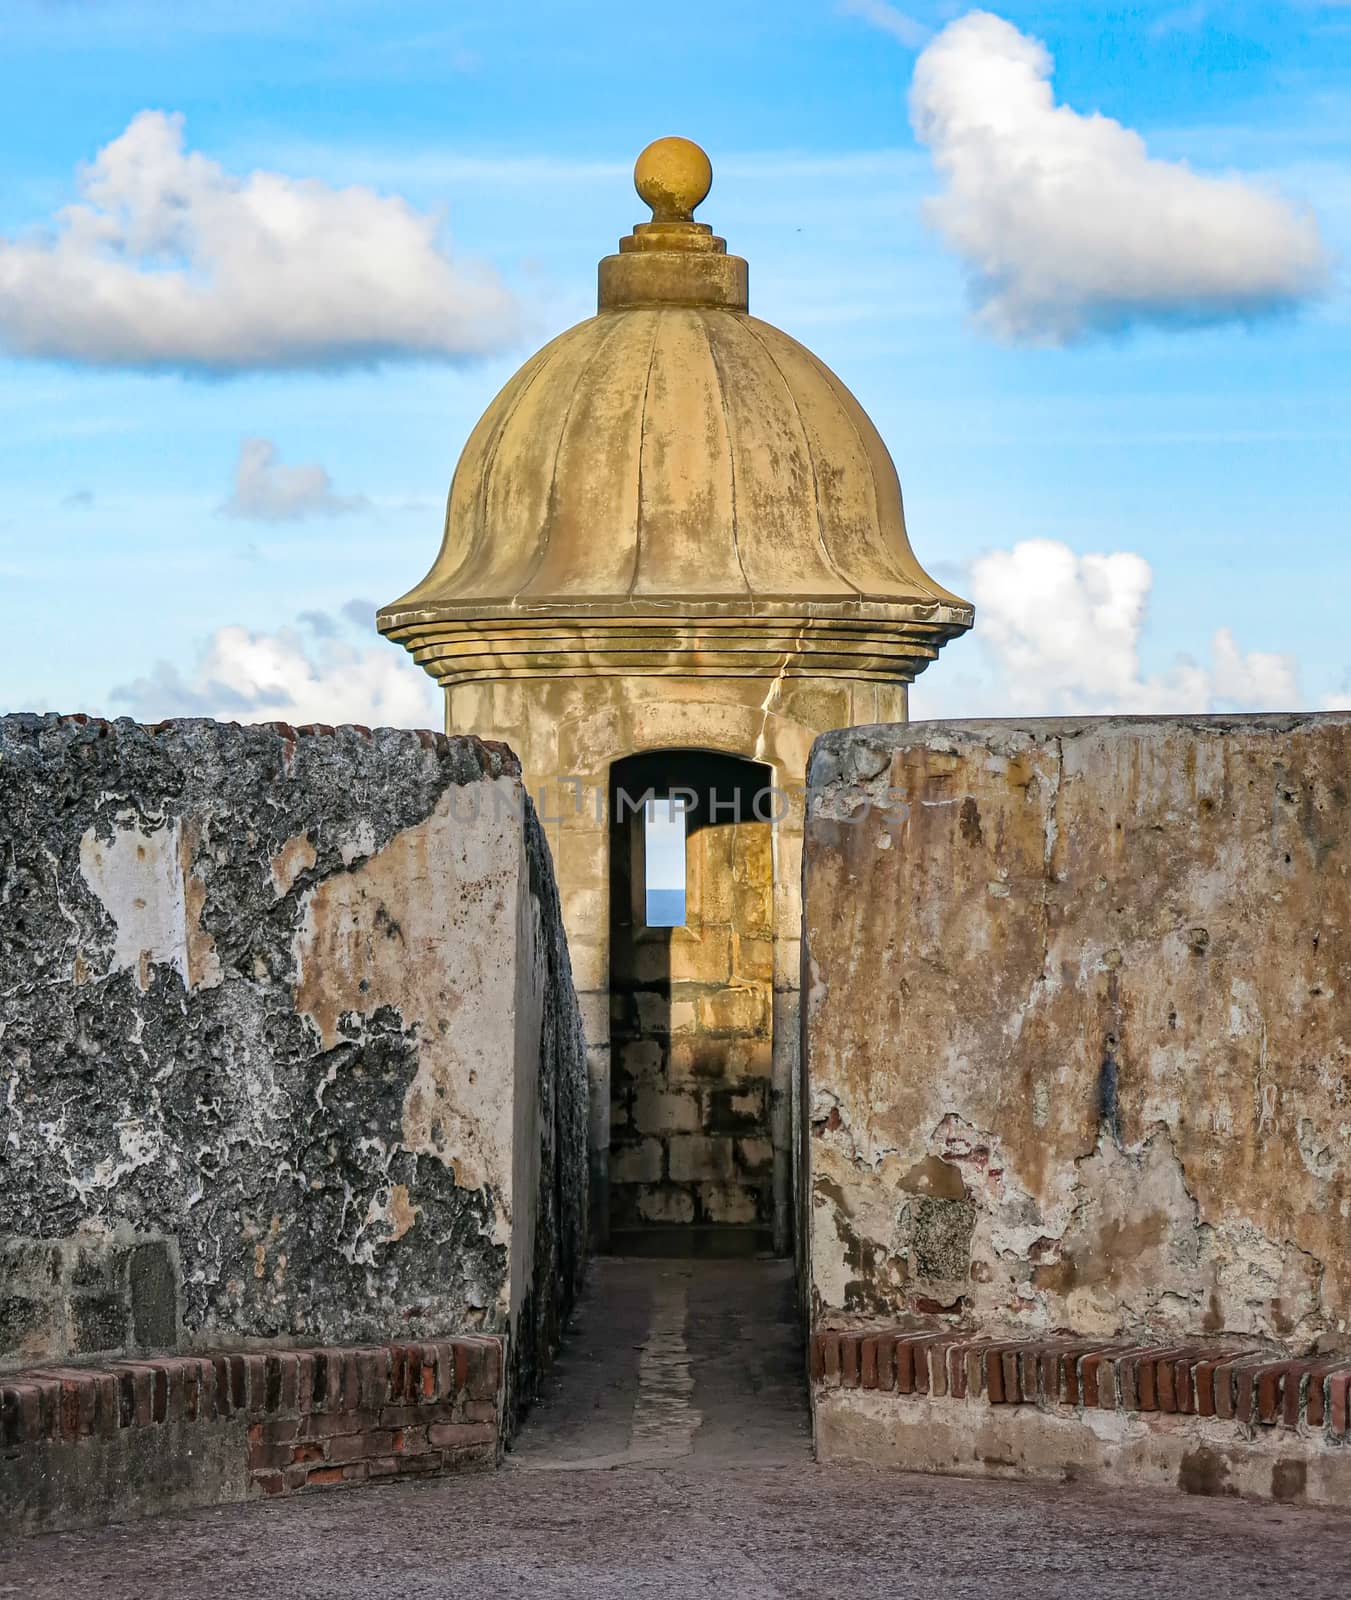 An afternoon closeup view of one of the watch towers inside the Castillo San Felipe del Morro in Old San Juan.